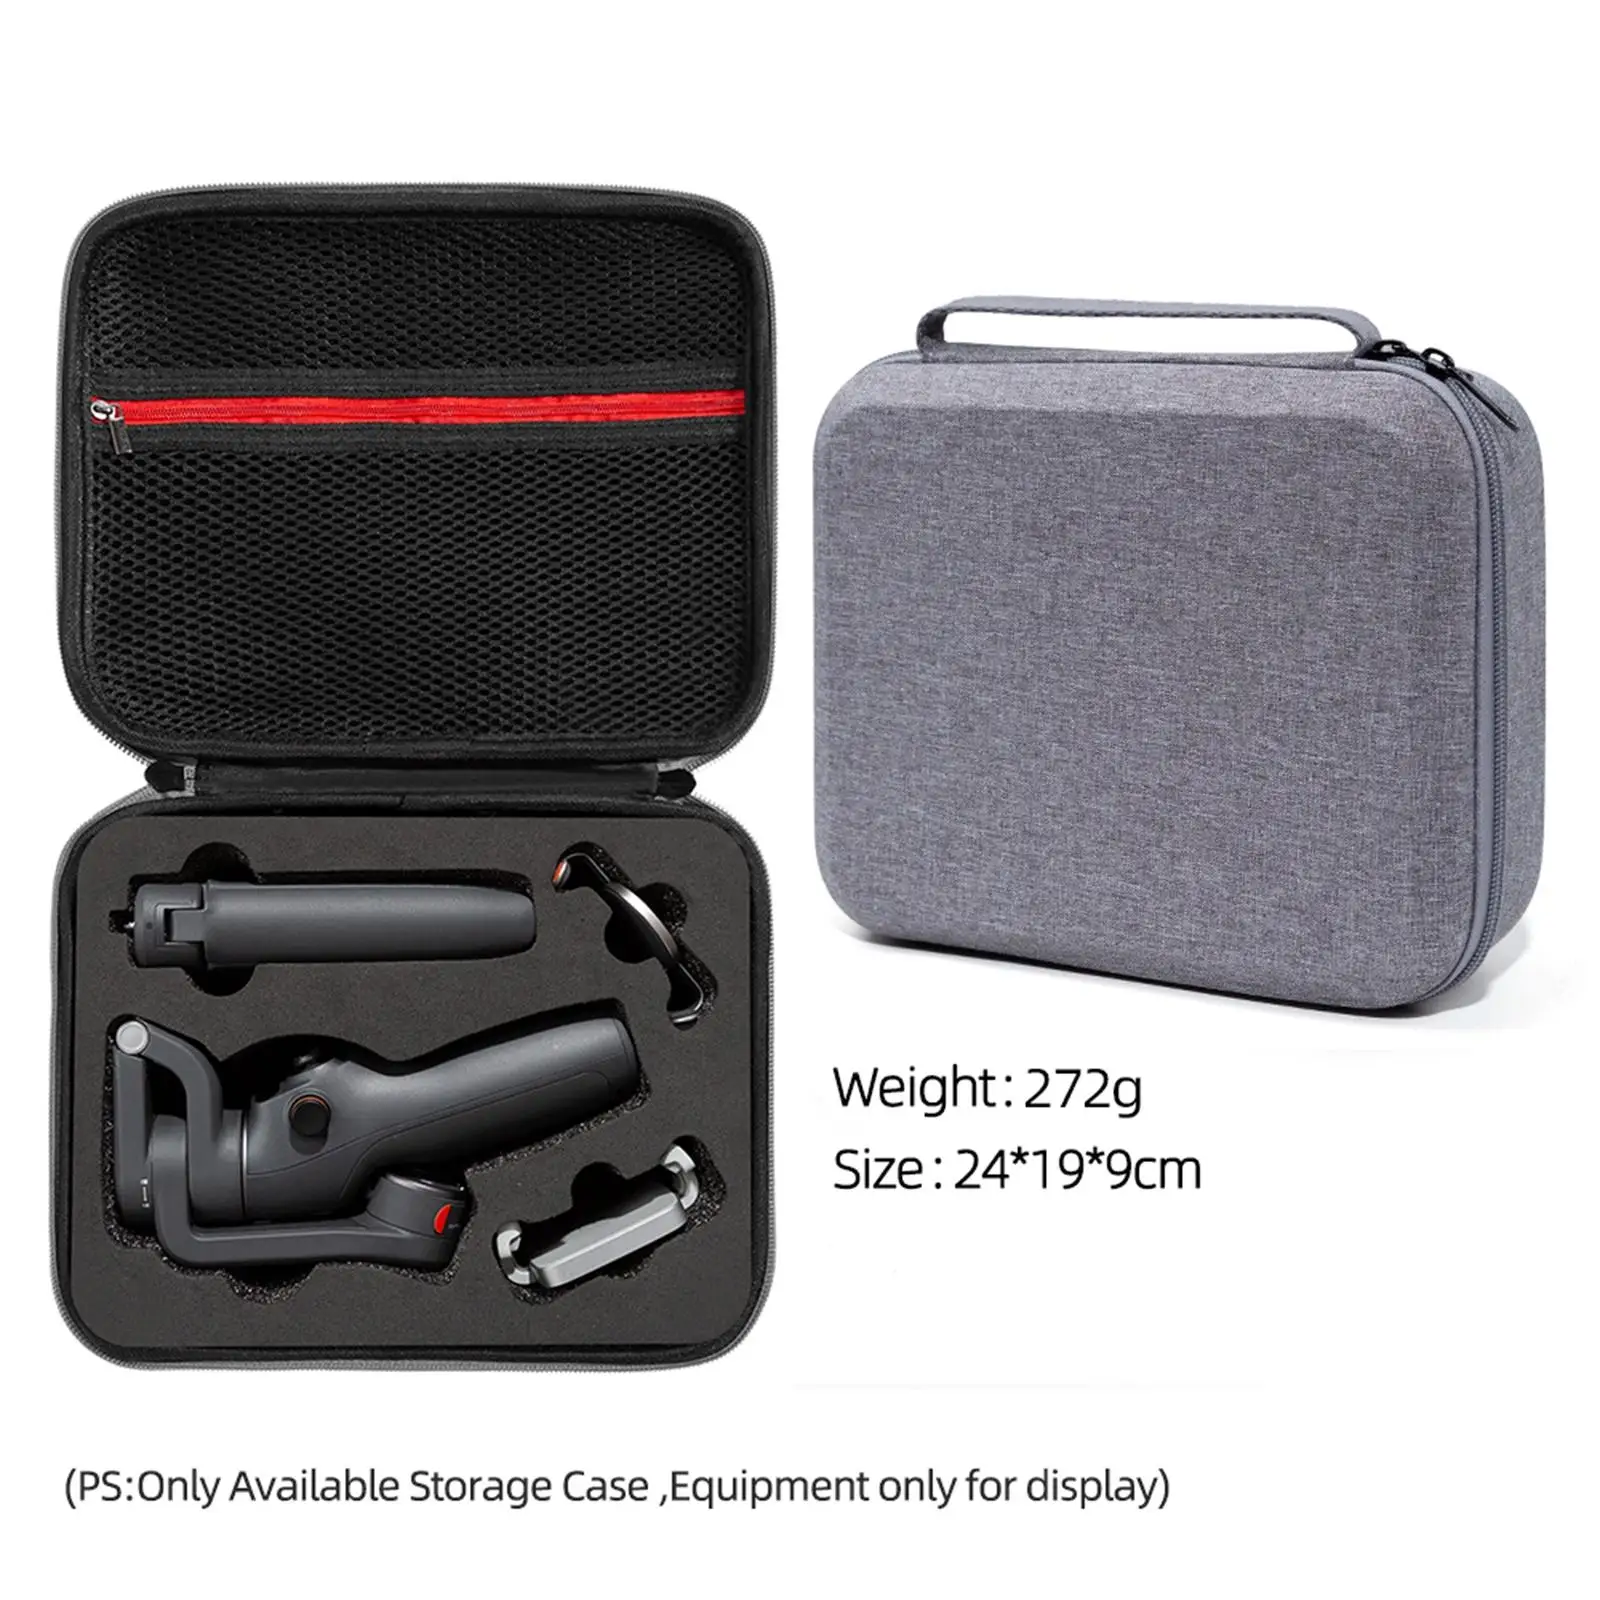 Carrying Case Handbag Premium Portable Waterproof Hard Shell Professional Durable for Gimbal Accessories